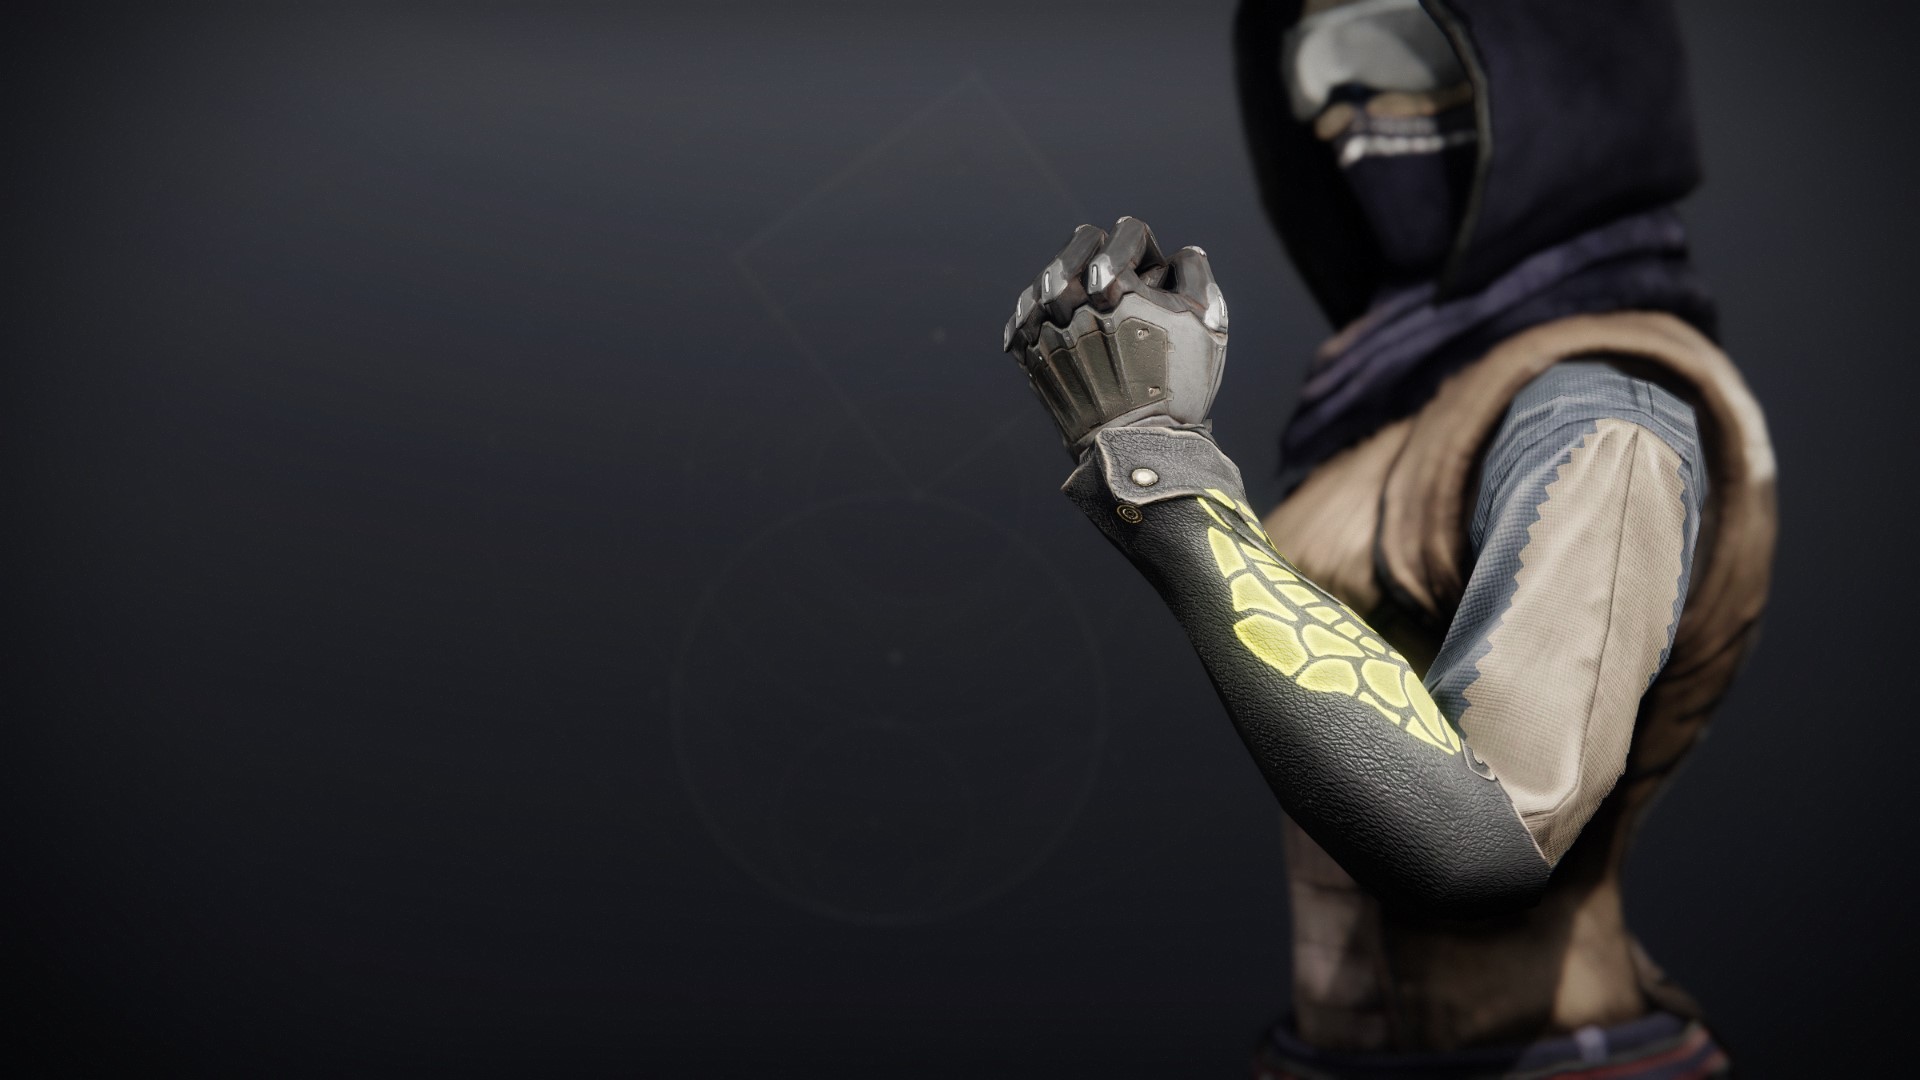 An in-game render of the Illicit Sentry Grips.